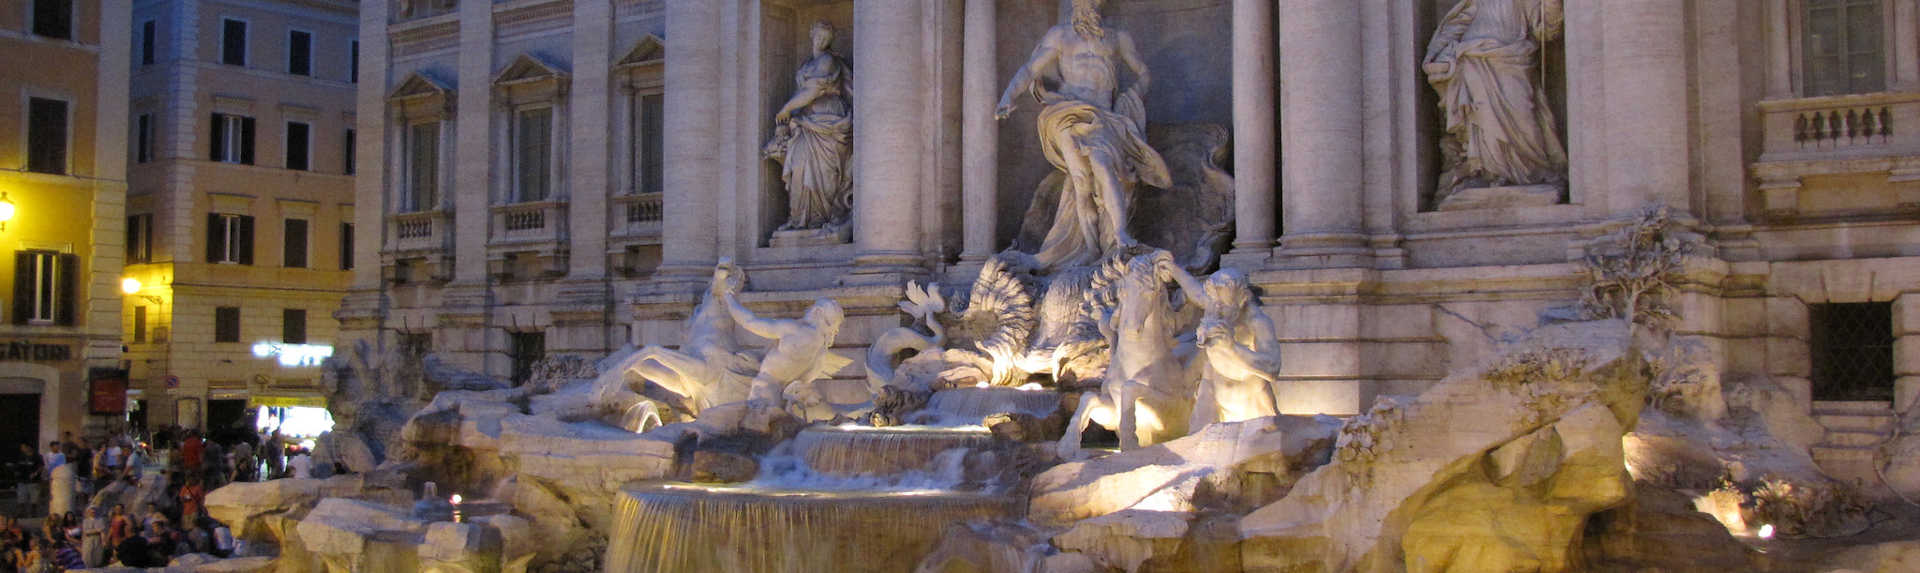 What is the Trevi Fountain in Rome famous for?